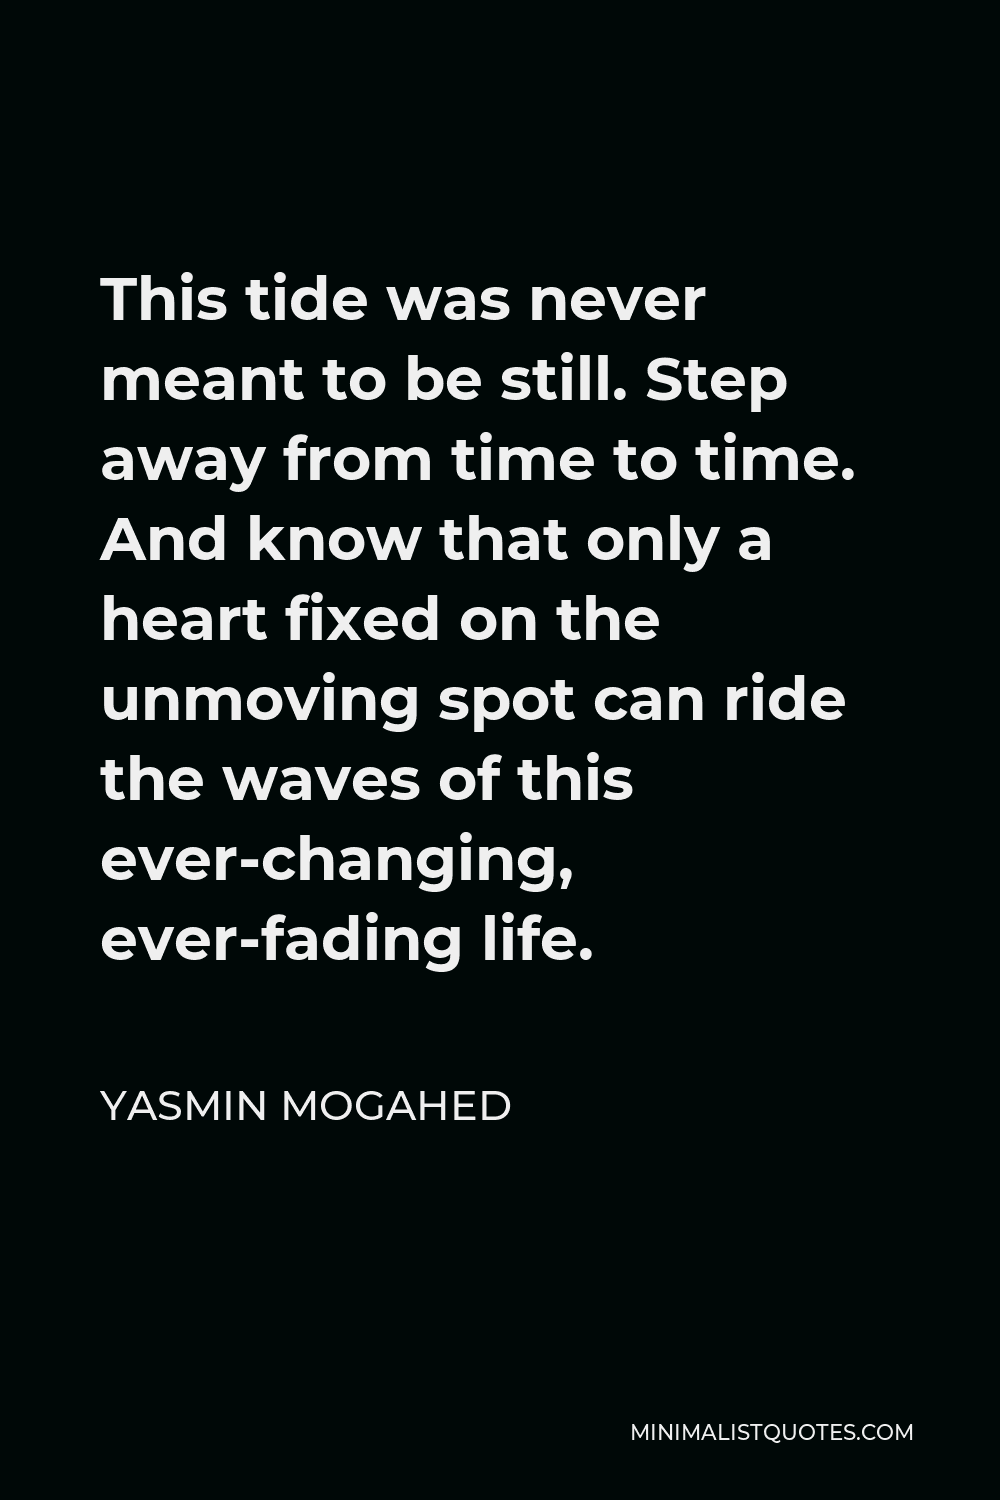 Yasmin Mogahed Quote - This tide was never meant to be still. Step away from time to time. And know that only a heart fixed on the unmoving spot can ride the waves of this ever-changing, ever-fading life.